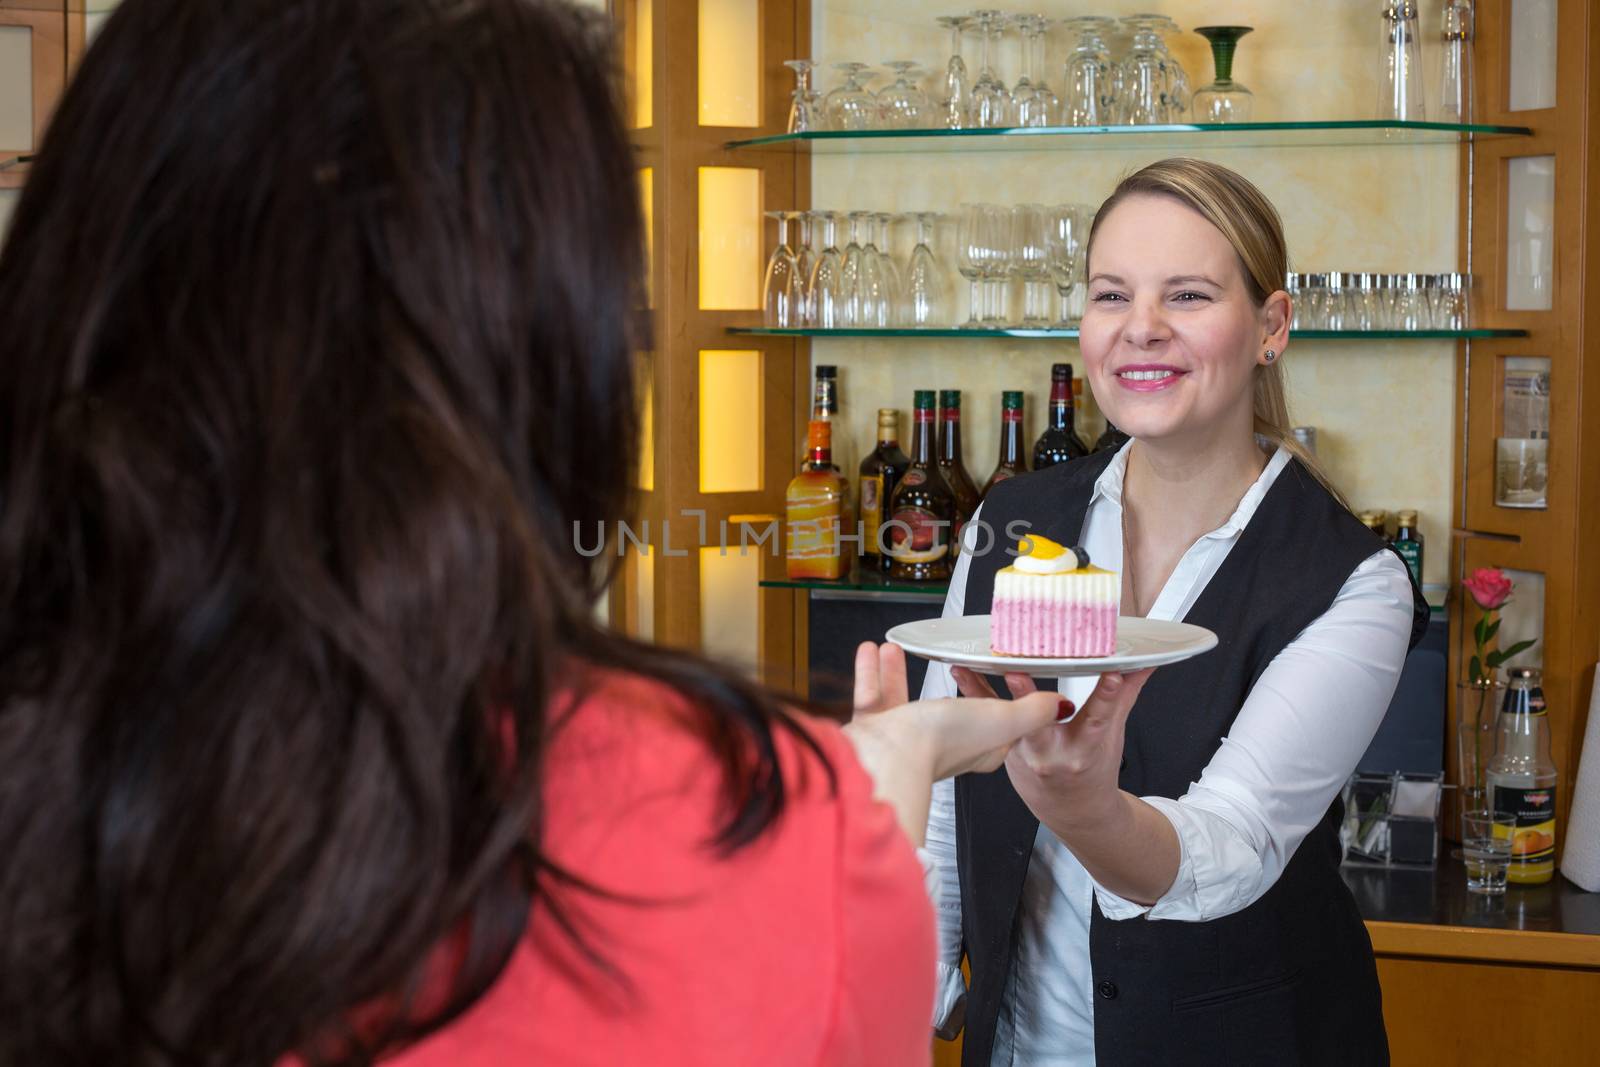 waitress gives piece of cake to client by ikonoklast_fotografie